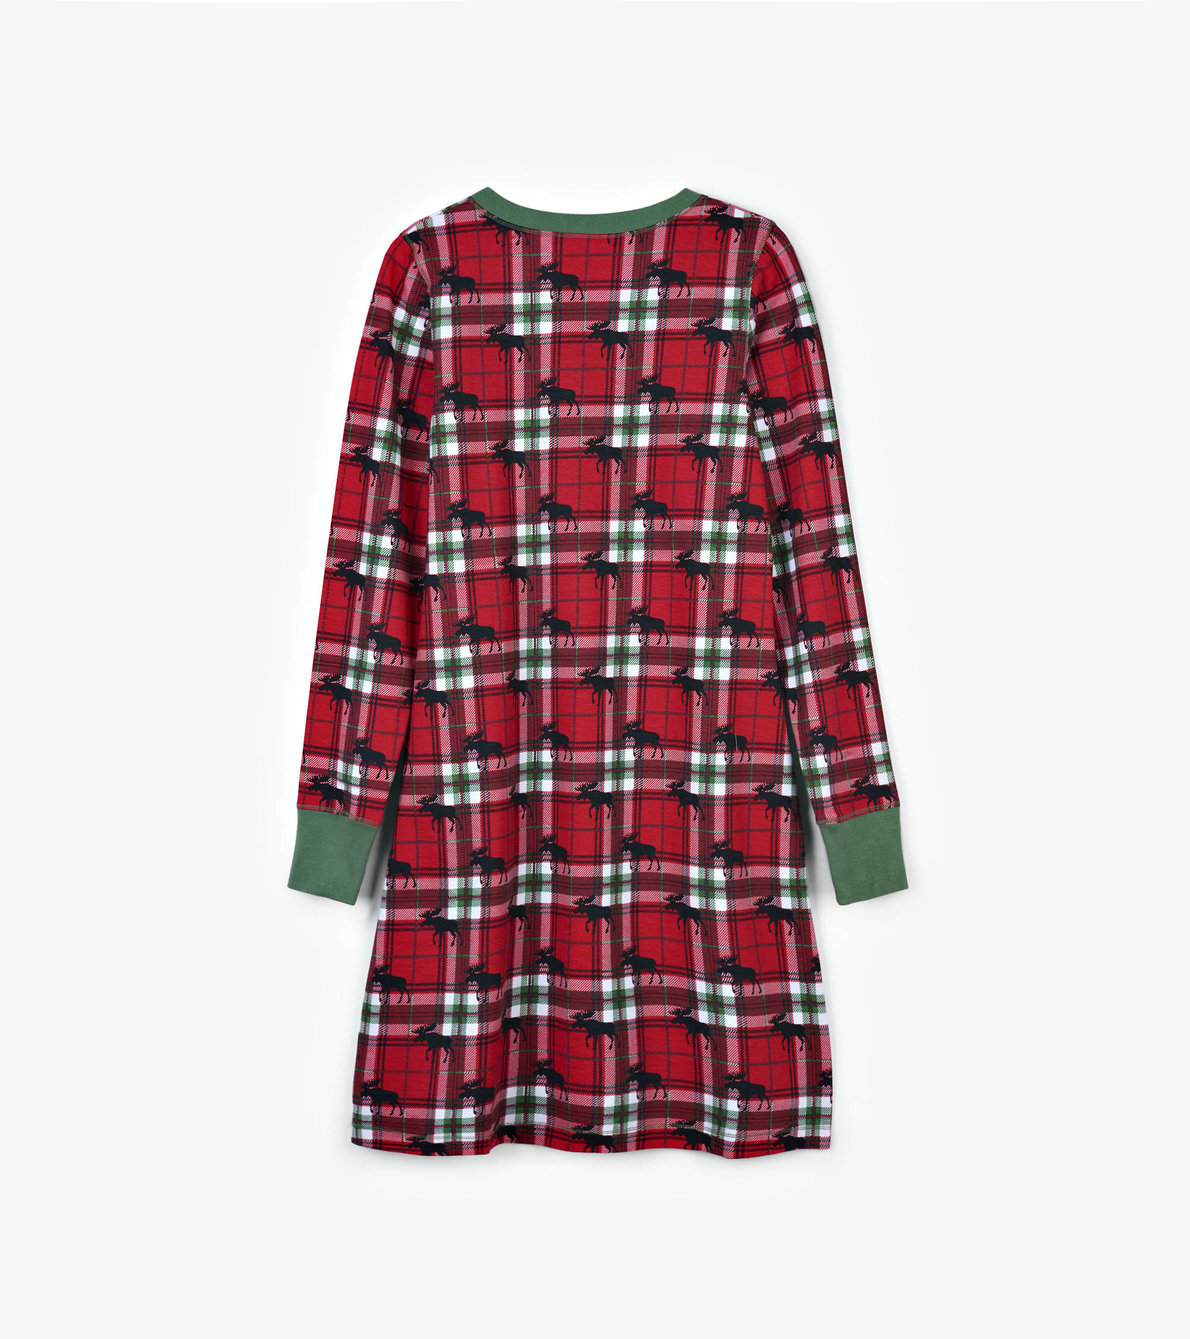 View larger image of Holiday Moose on Plaid Women's Nightdress